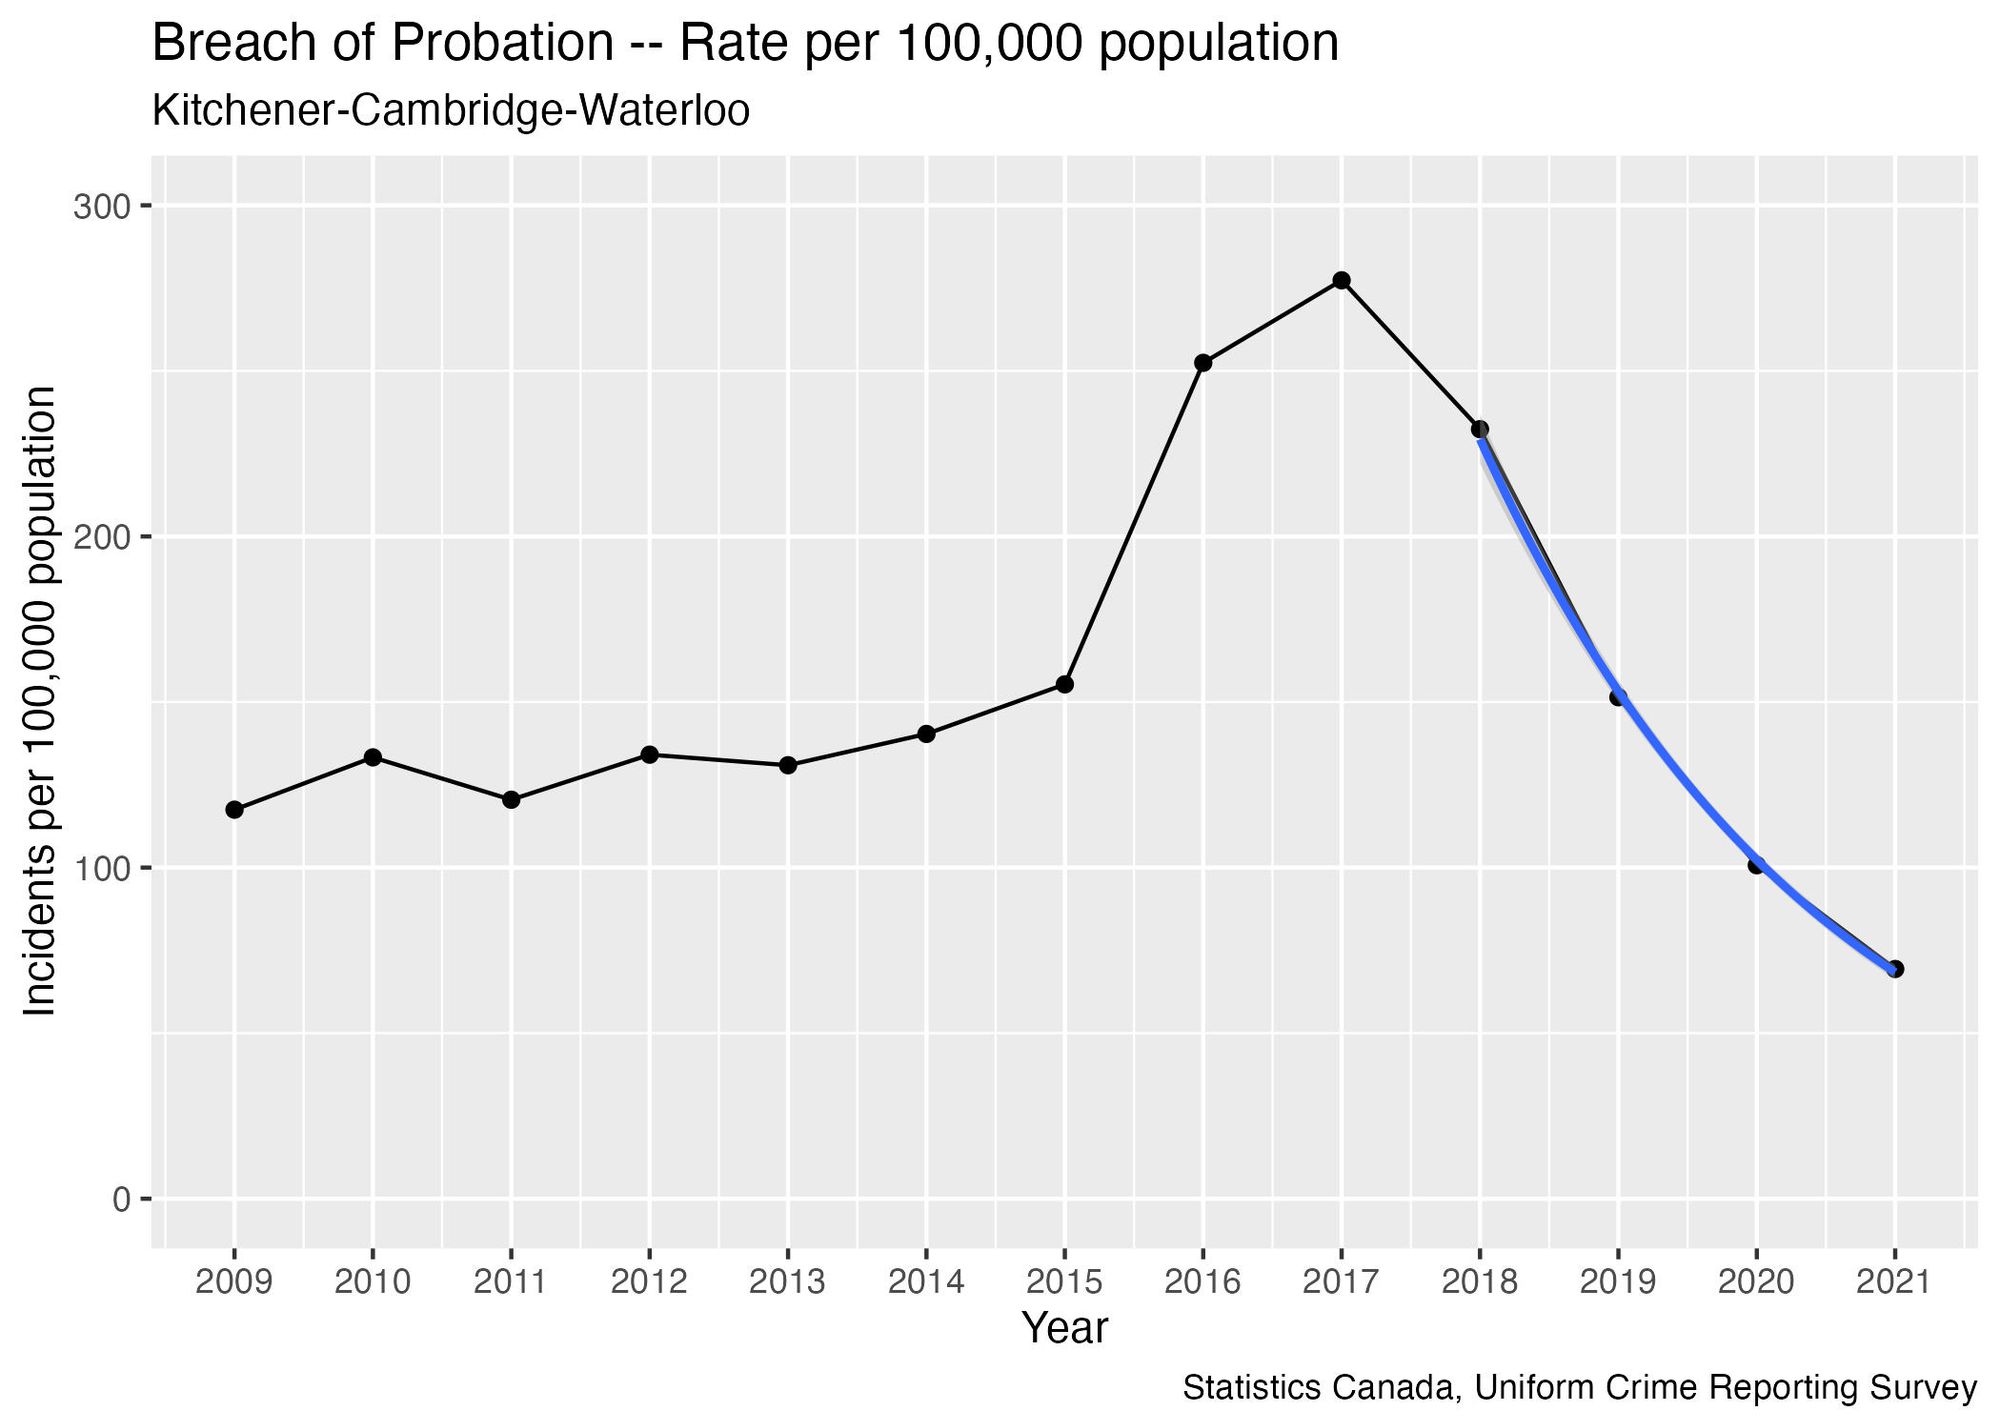 A graph of “Breach of Probation—Rate per 100,000 population” for Kitchener-Cambridge-Waterloo. The rate hovers between 100 and 150 over the time period between 2009 and 2015, then increases sharply to around 275 in 2017. From there it decreases every year until 2021, where it reaches a low around 75. A blue curve is overlaid on the last four years, and is very close to the data points.